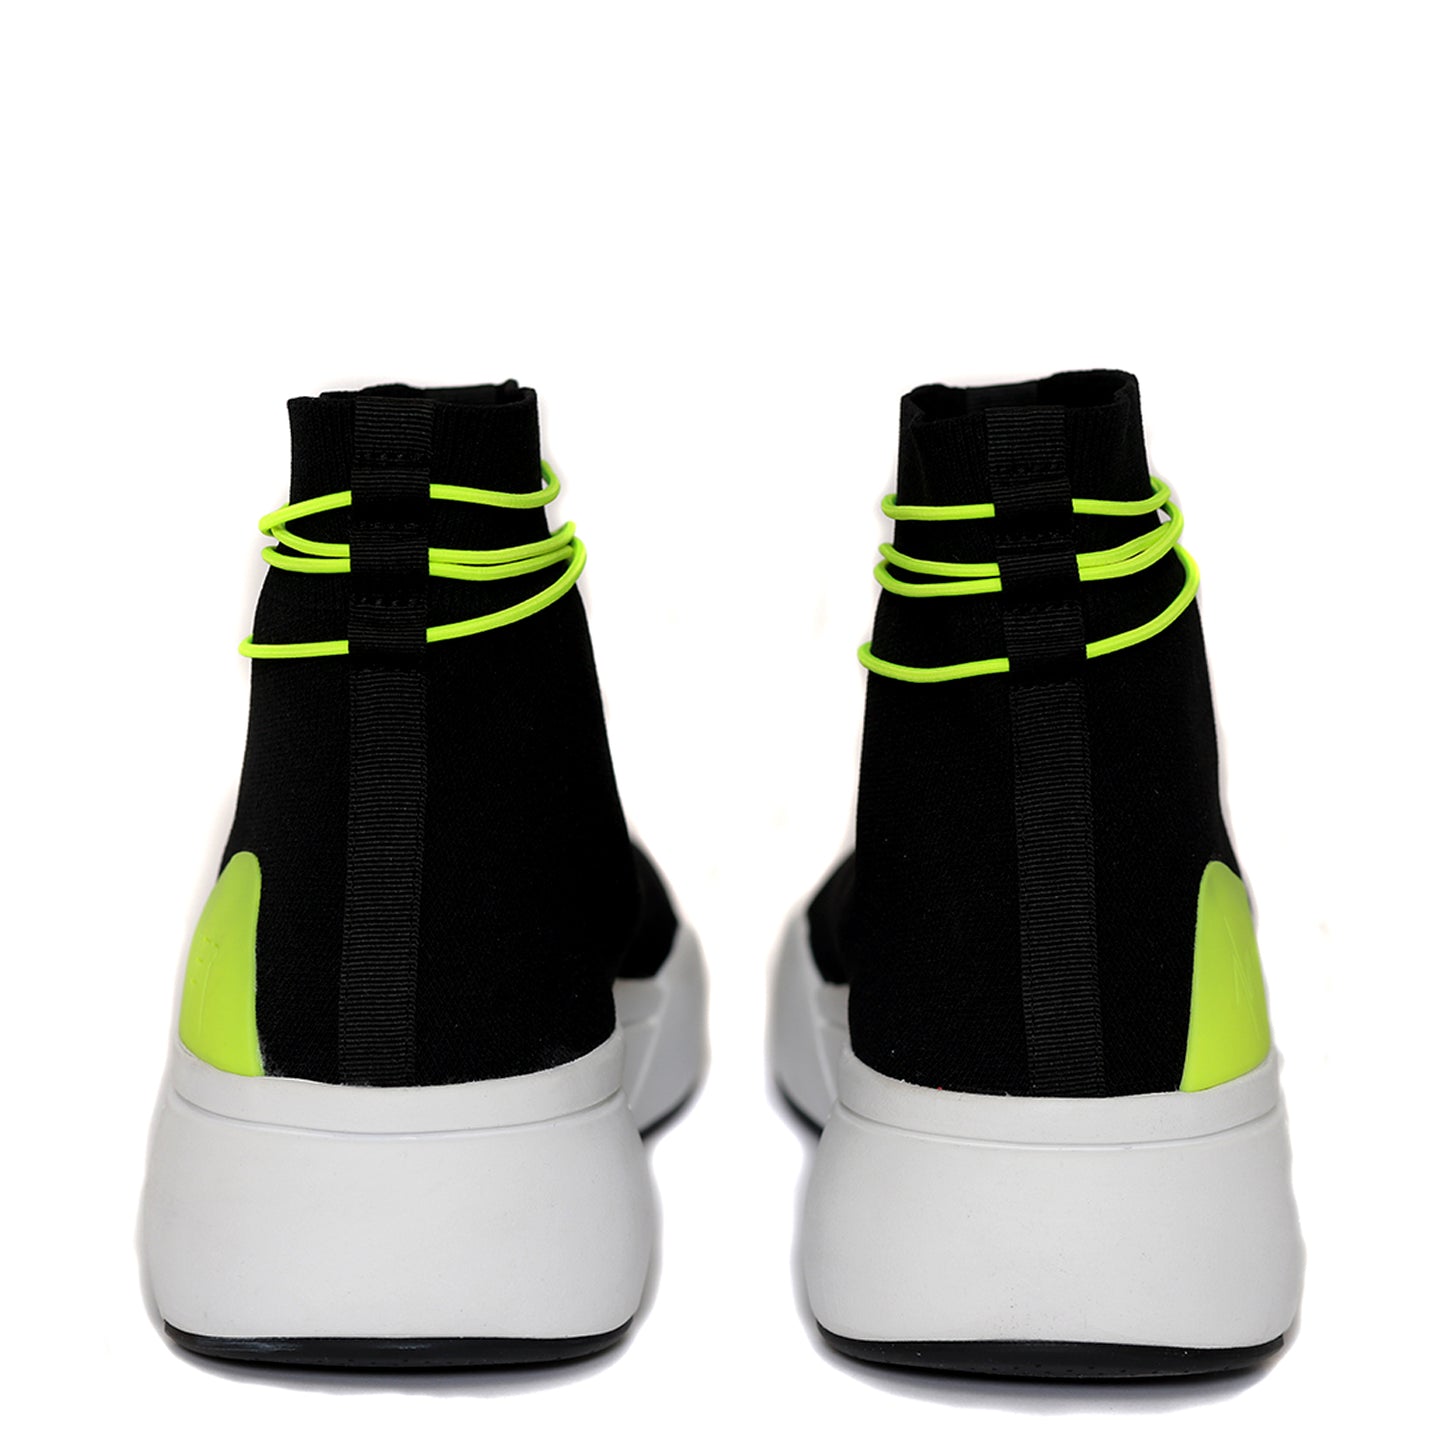 ELLIPSIS SOCK TRAINER IN BLACK, NEON AND WHITE